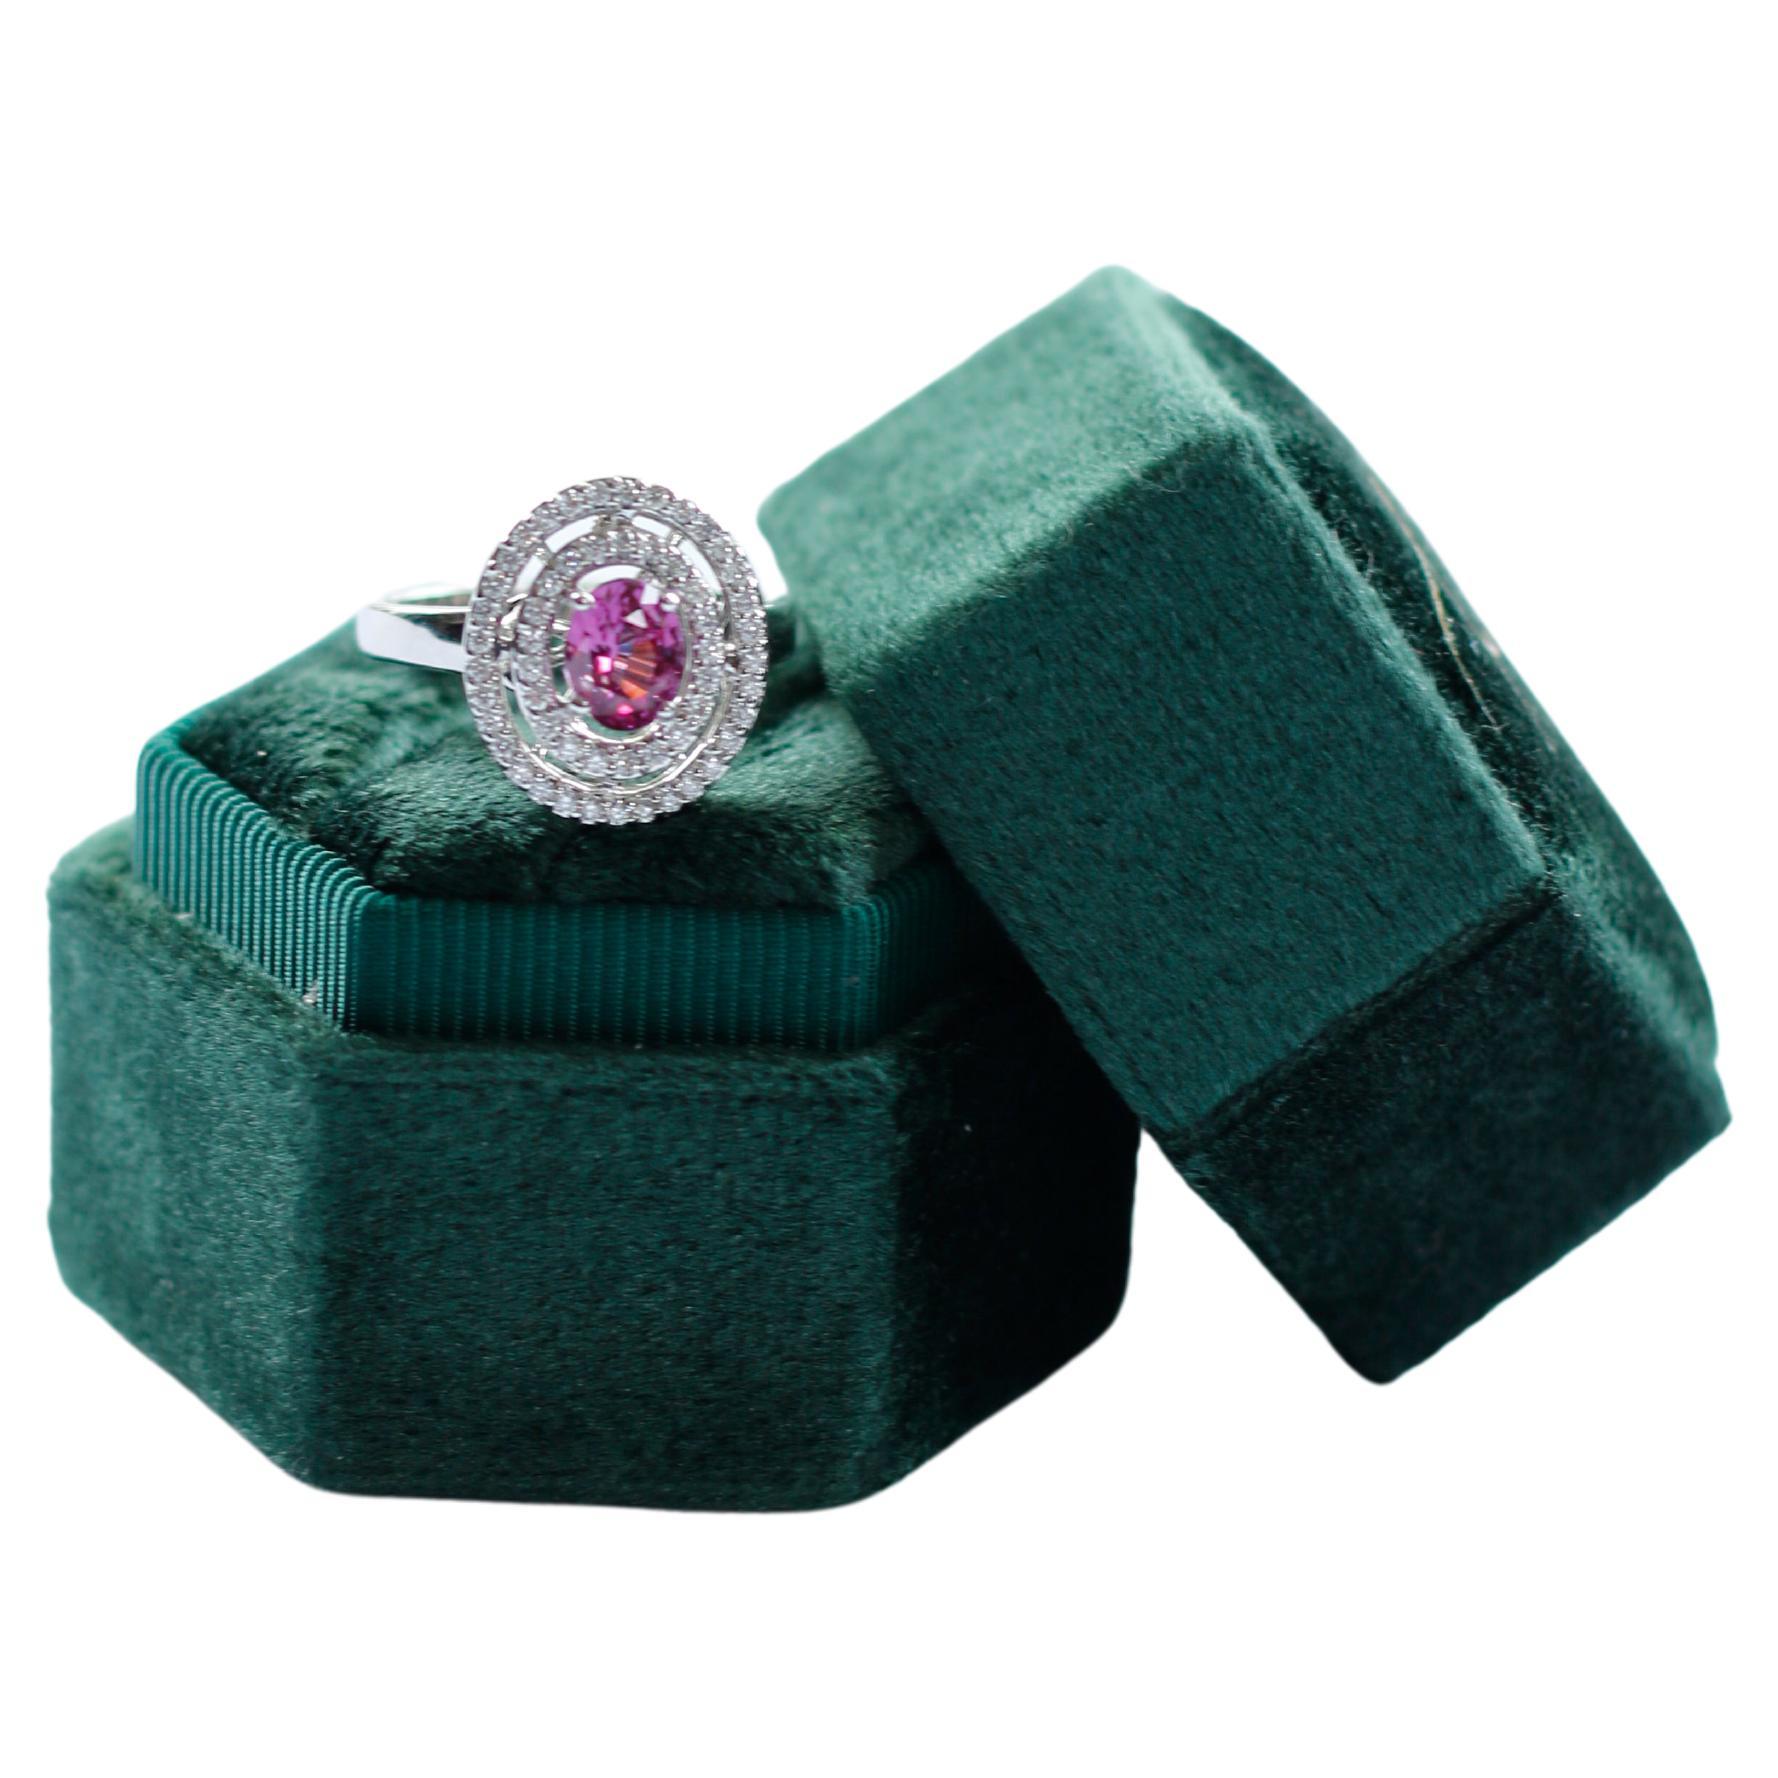 Ceylon Pink Sapphire 1.12 Carat Cocktail Ring For Sale